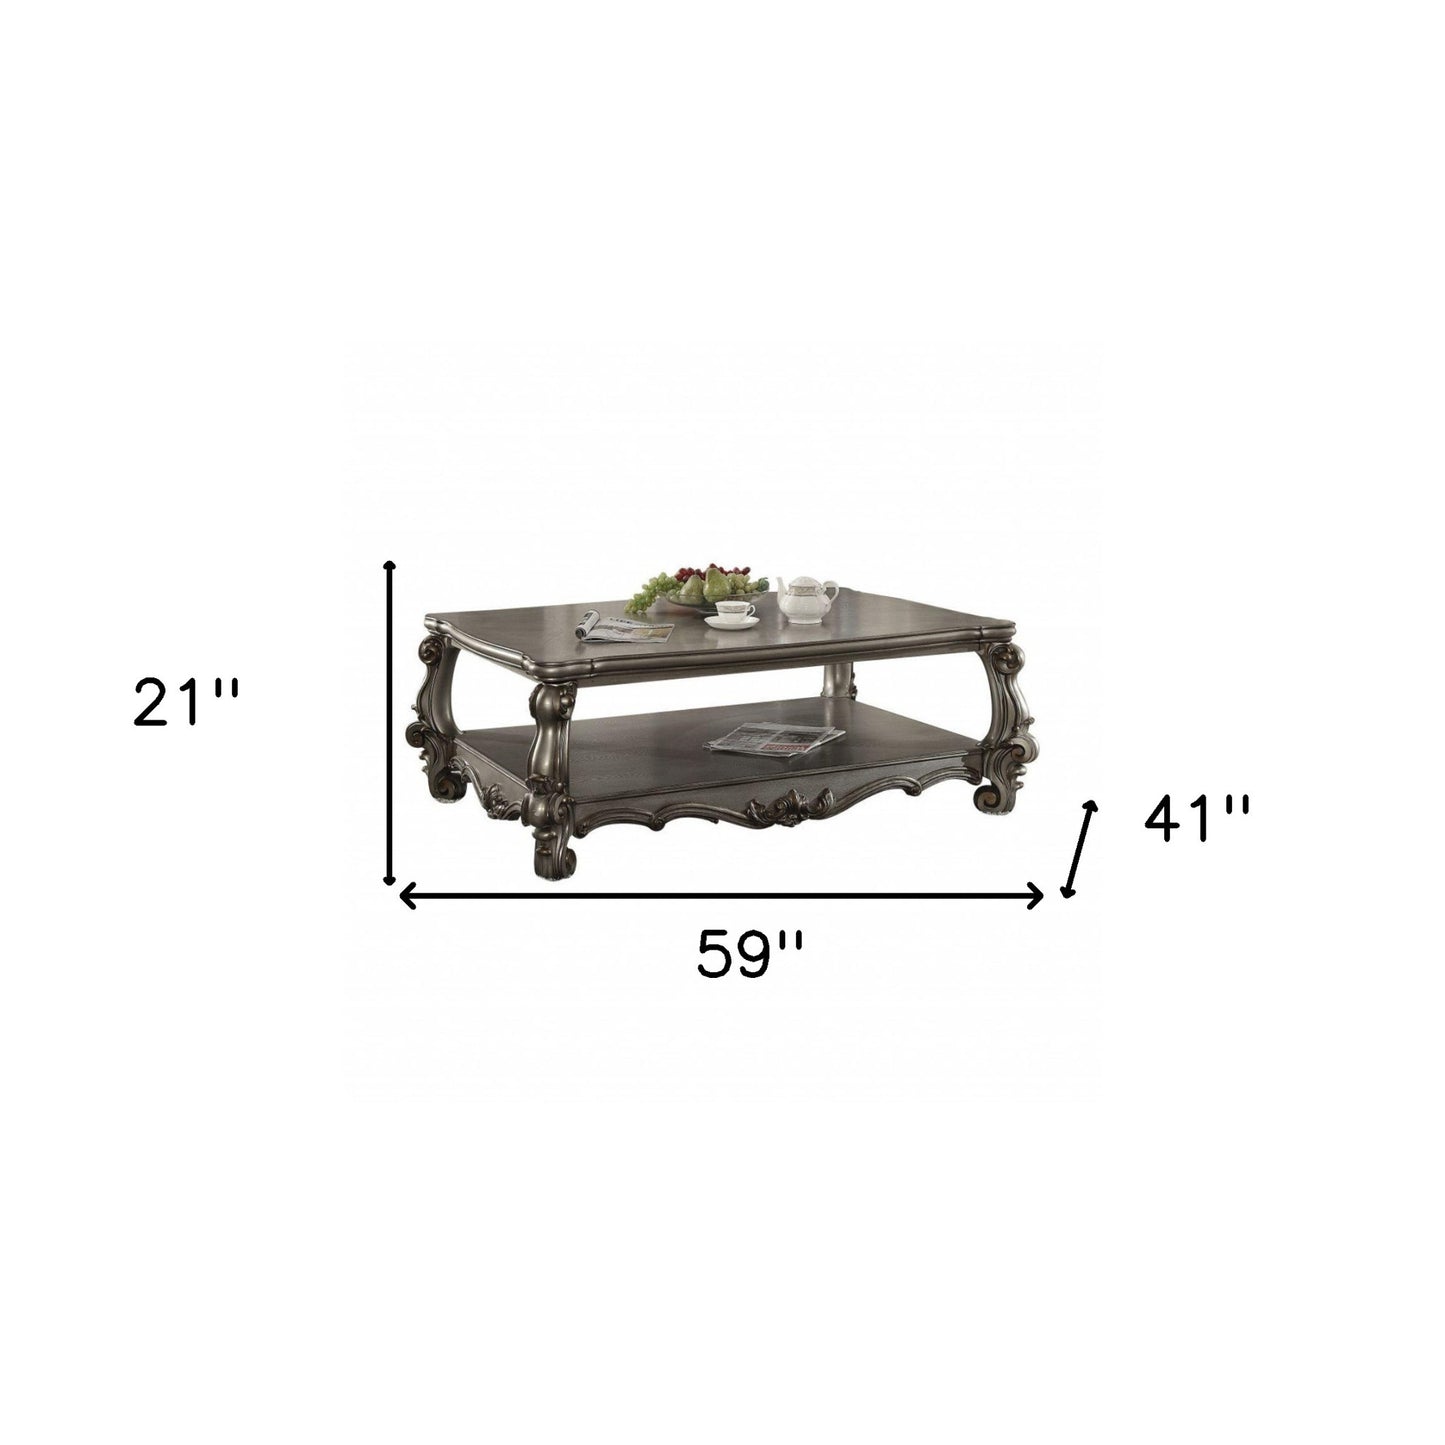 59" Antique Platinum Manufactured Wood Rectangular Coffee Table With Shelf